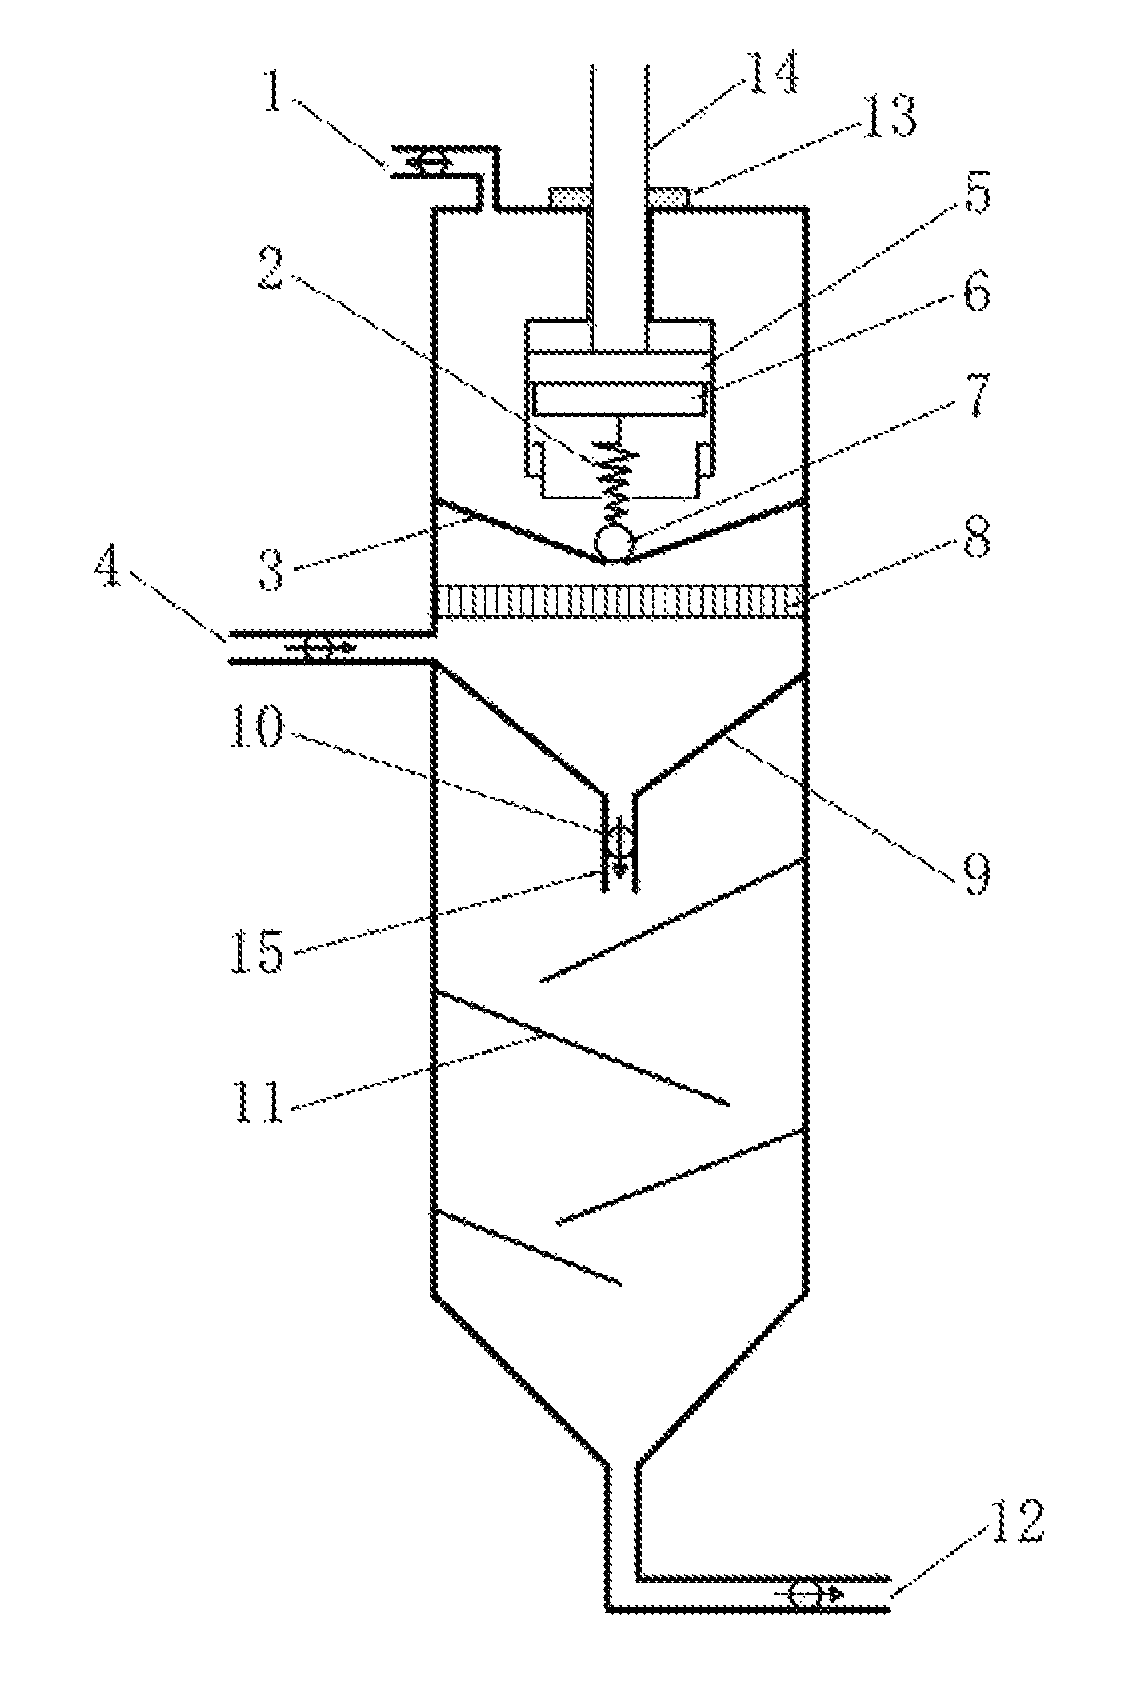 Gas-liquid separation apparatus suitable for gas hydrate slurry